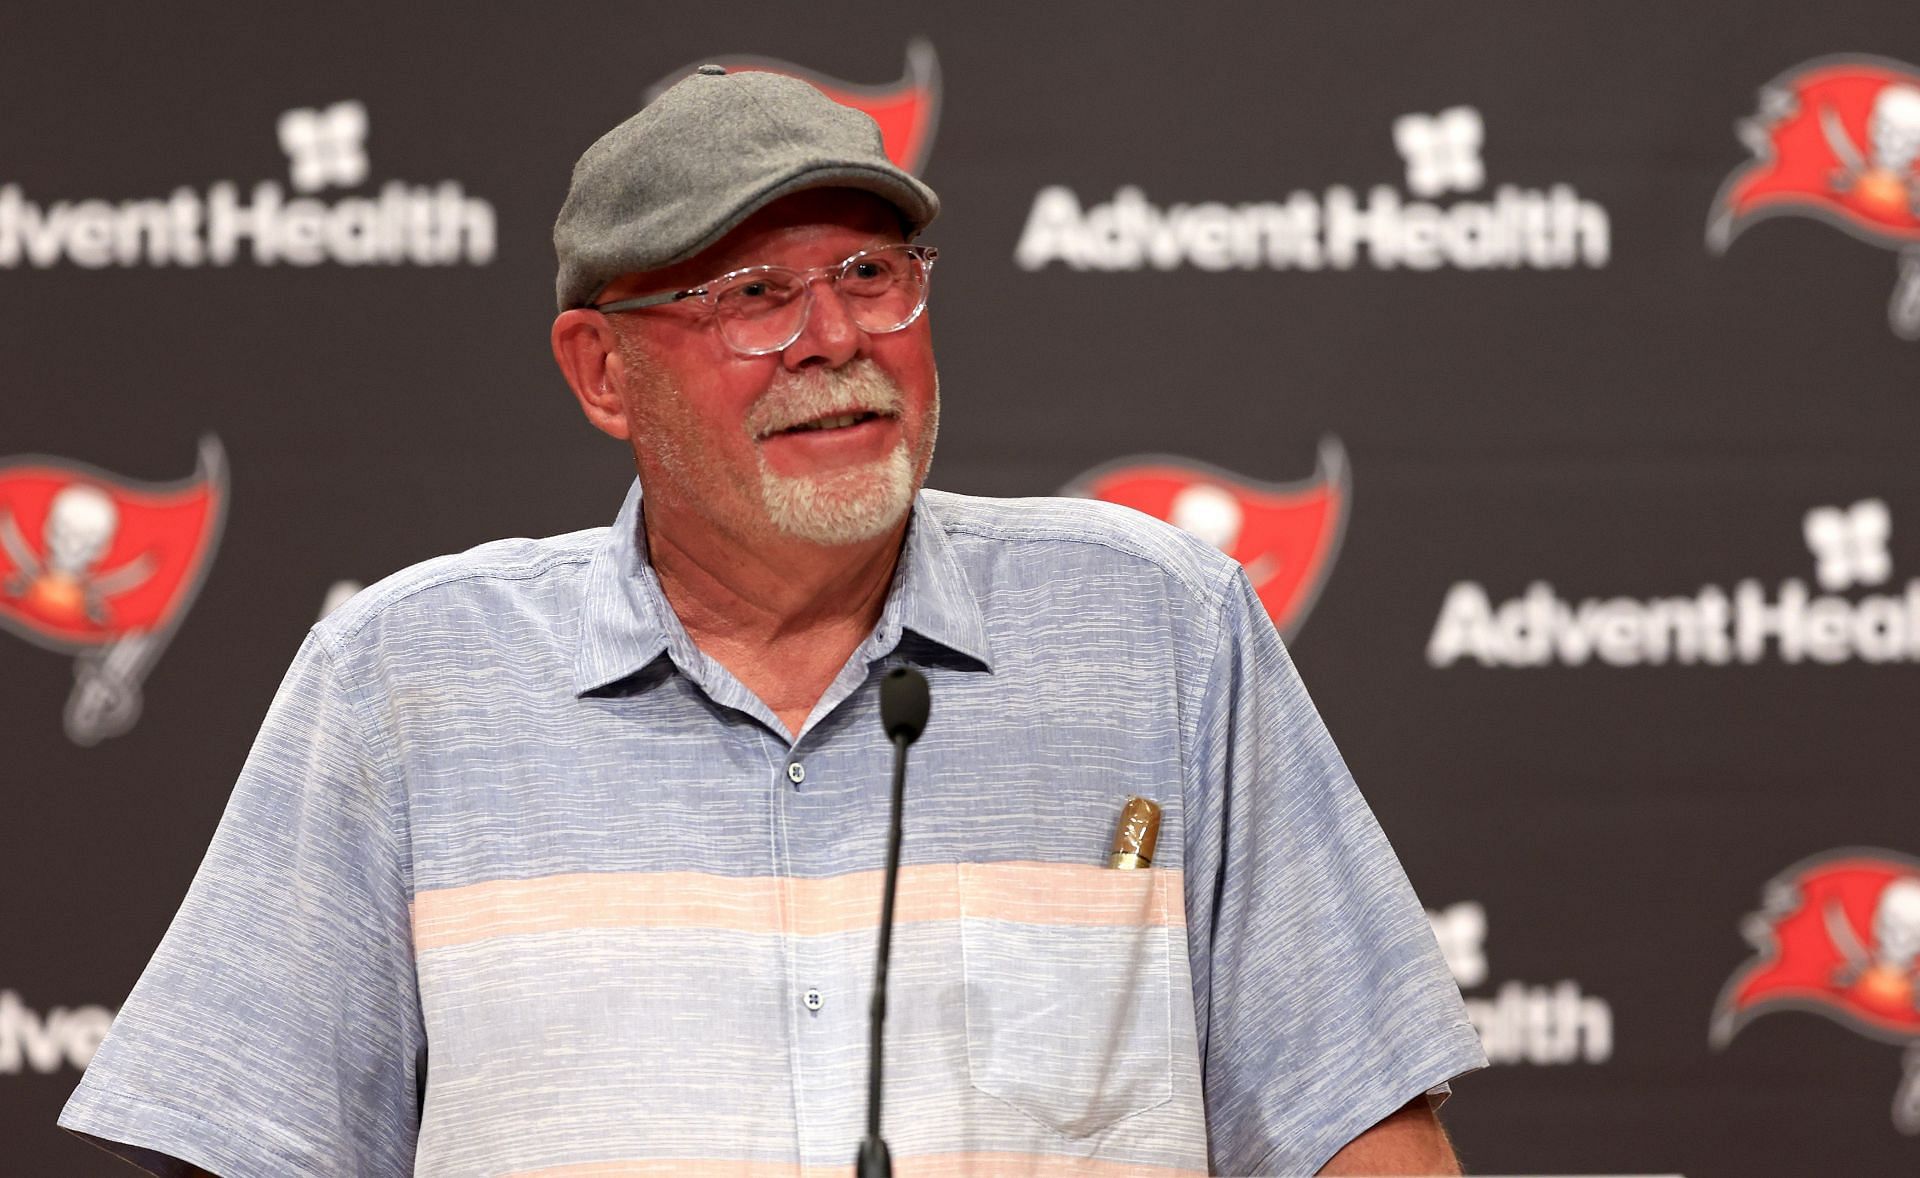 Arians at the Tampa Bay Buccaneers Press Conference